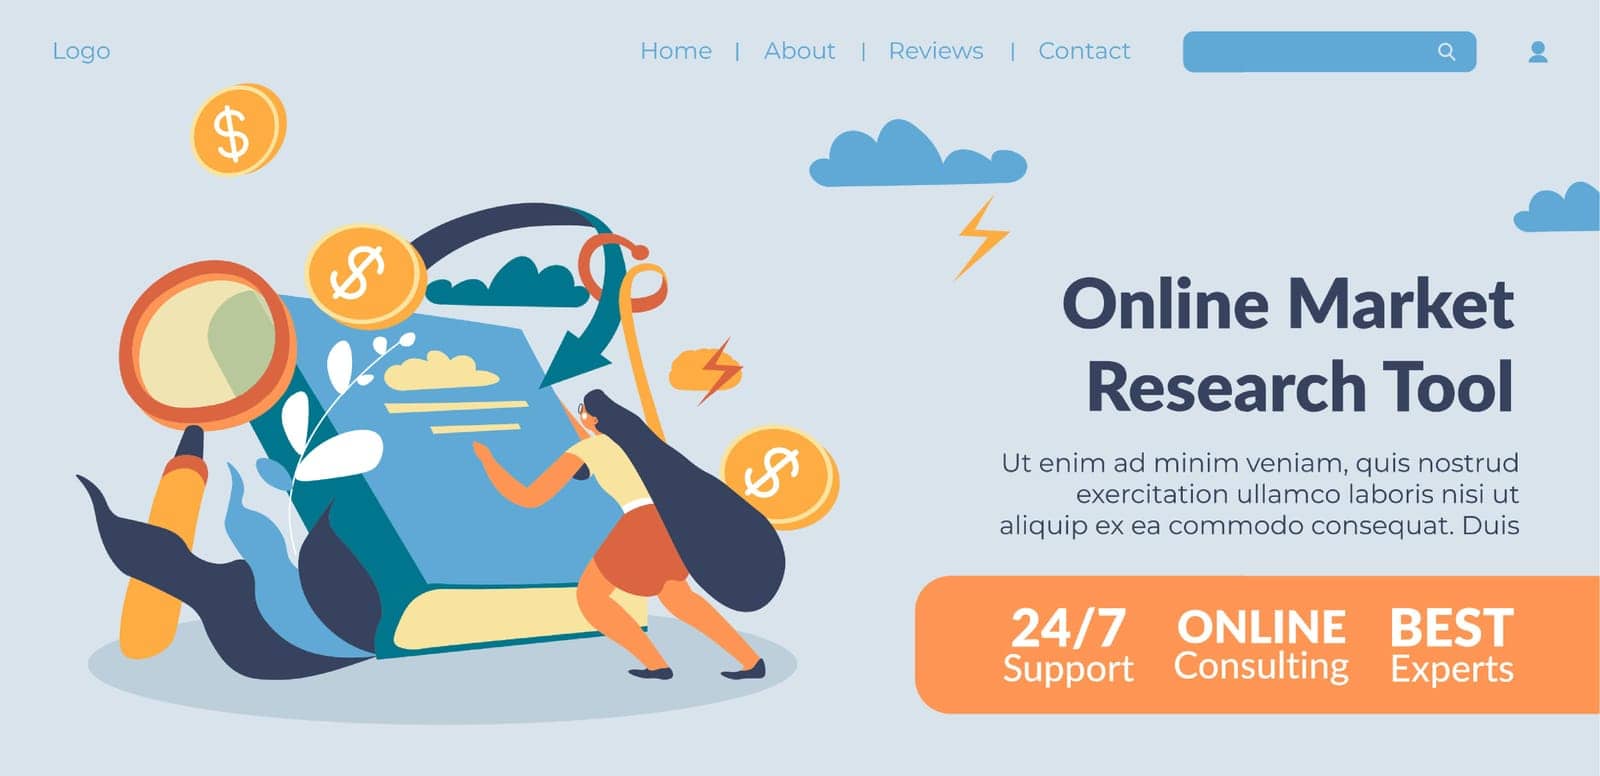 Online market research tool for your business by Sonulkaster